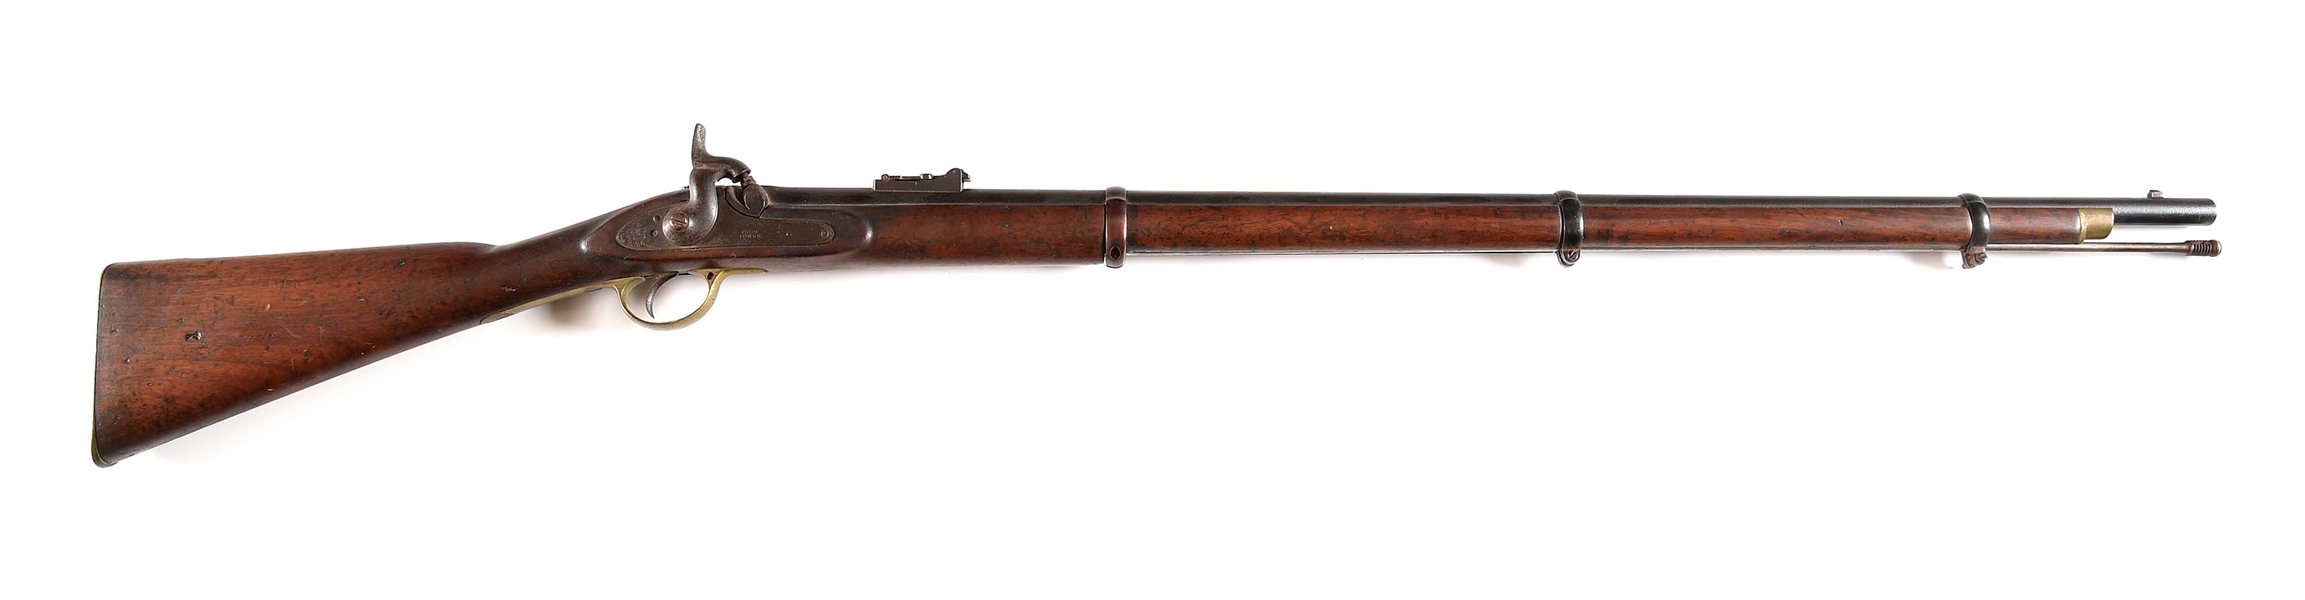 (A) TOWER 1853 ENFIELD .58 PERCUSSION RIFLE WITH UNIT MARKINGS.